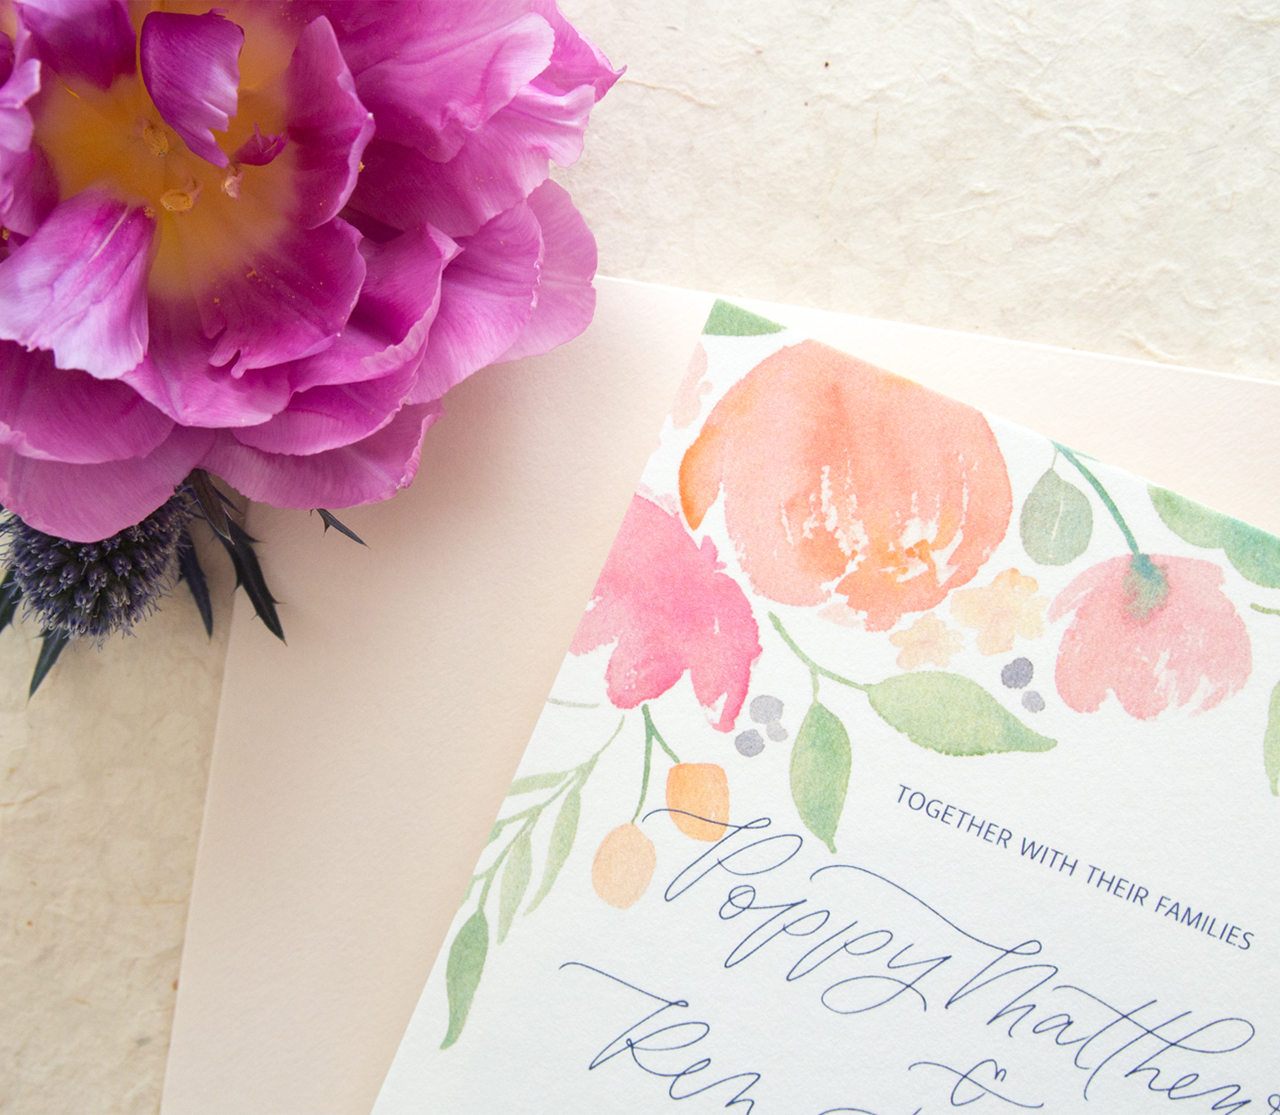 Whimsical Poppy and Eucalyptus Watercolor Wedding Invitations by Bright Room Studio